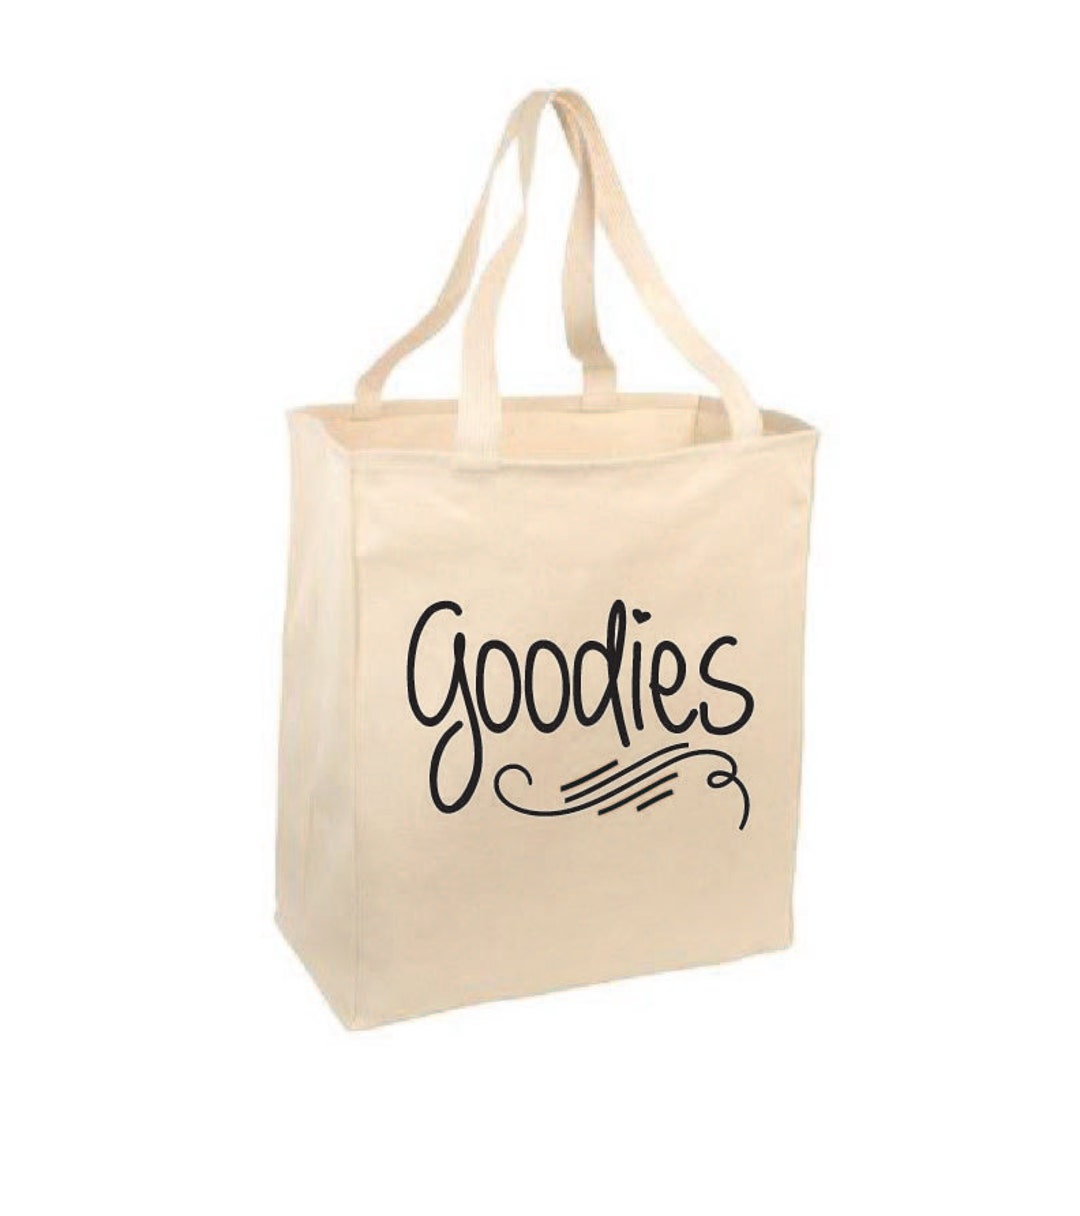 Shopping Tote. Grocery Tote. Reusable Totes. Canvas Tote. Goodies ...